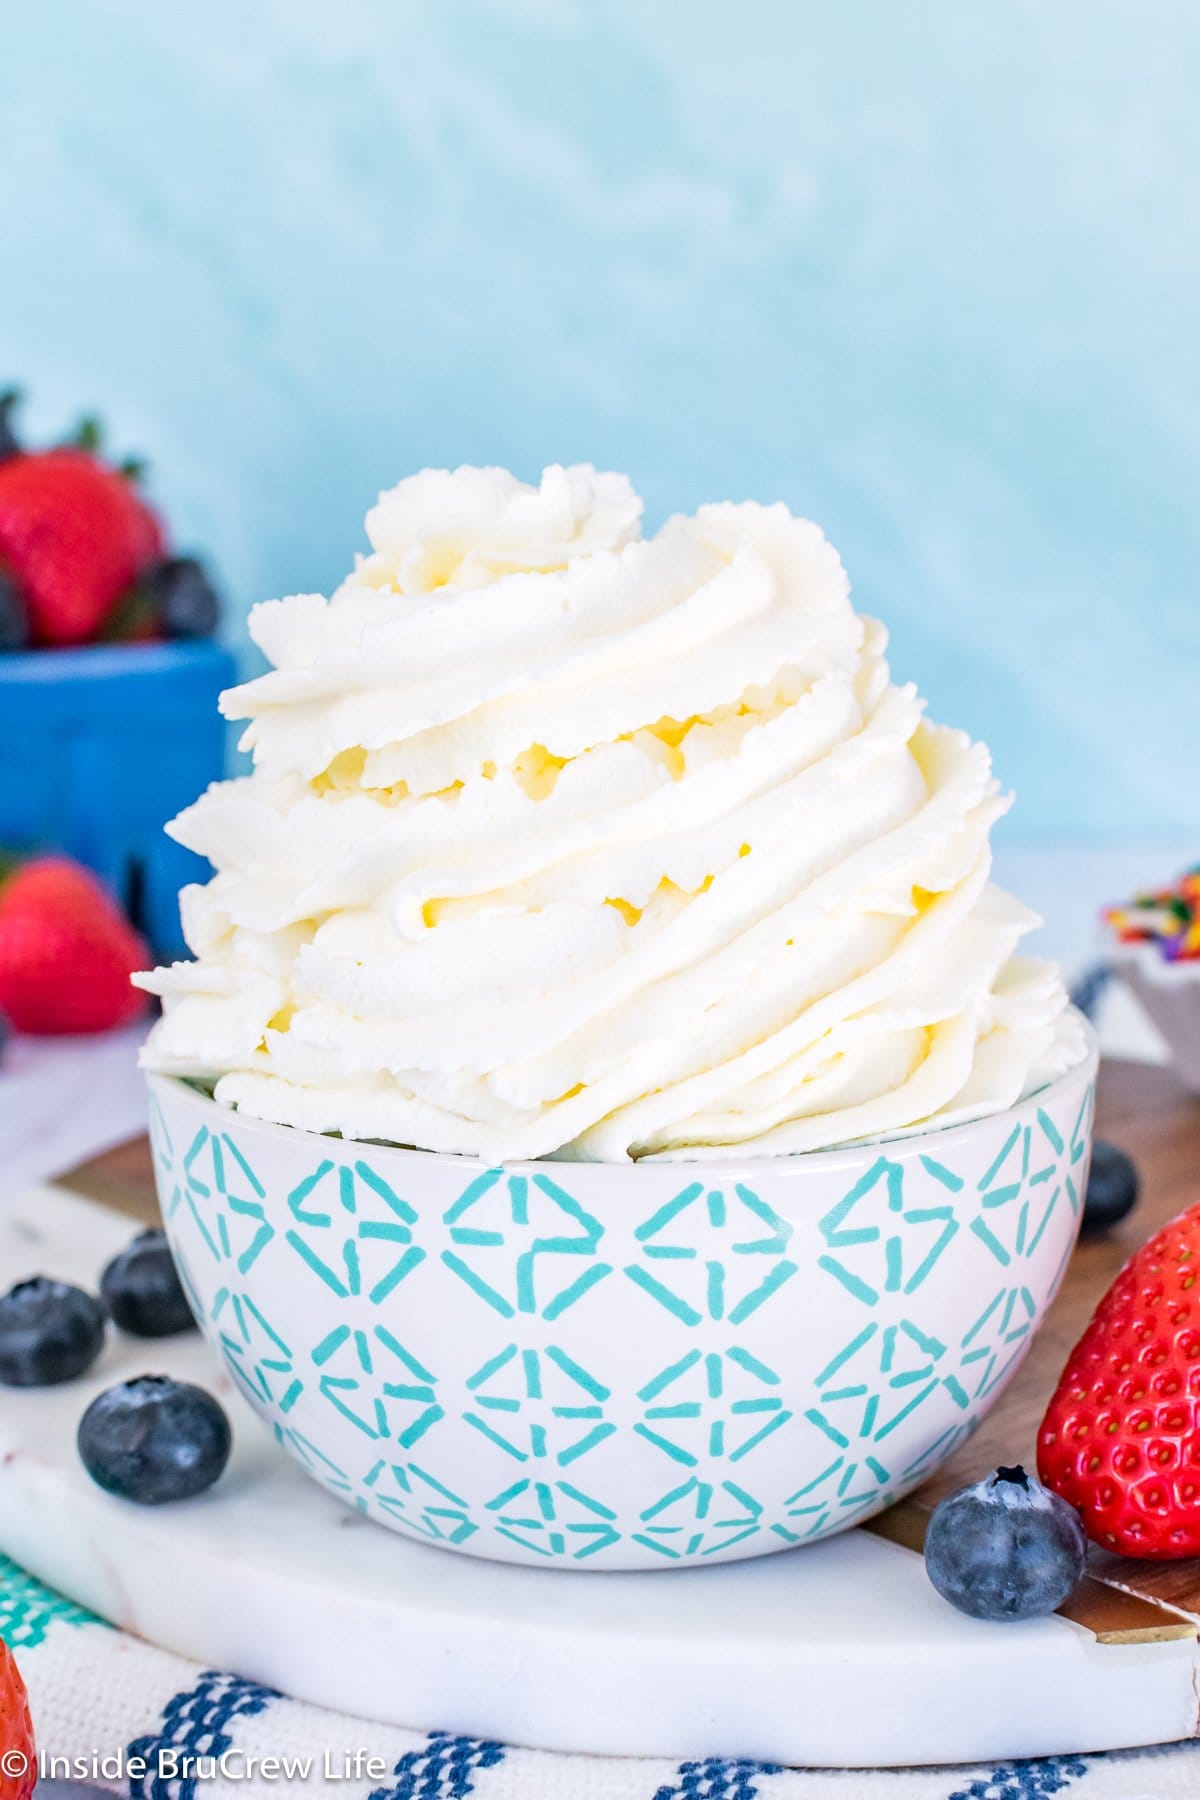 A big swirl of whipped cream in a white and teal bowl.